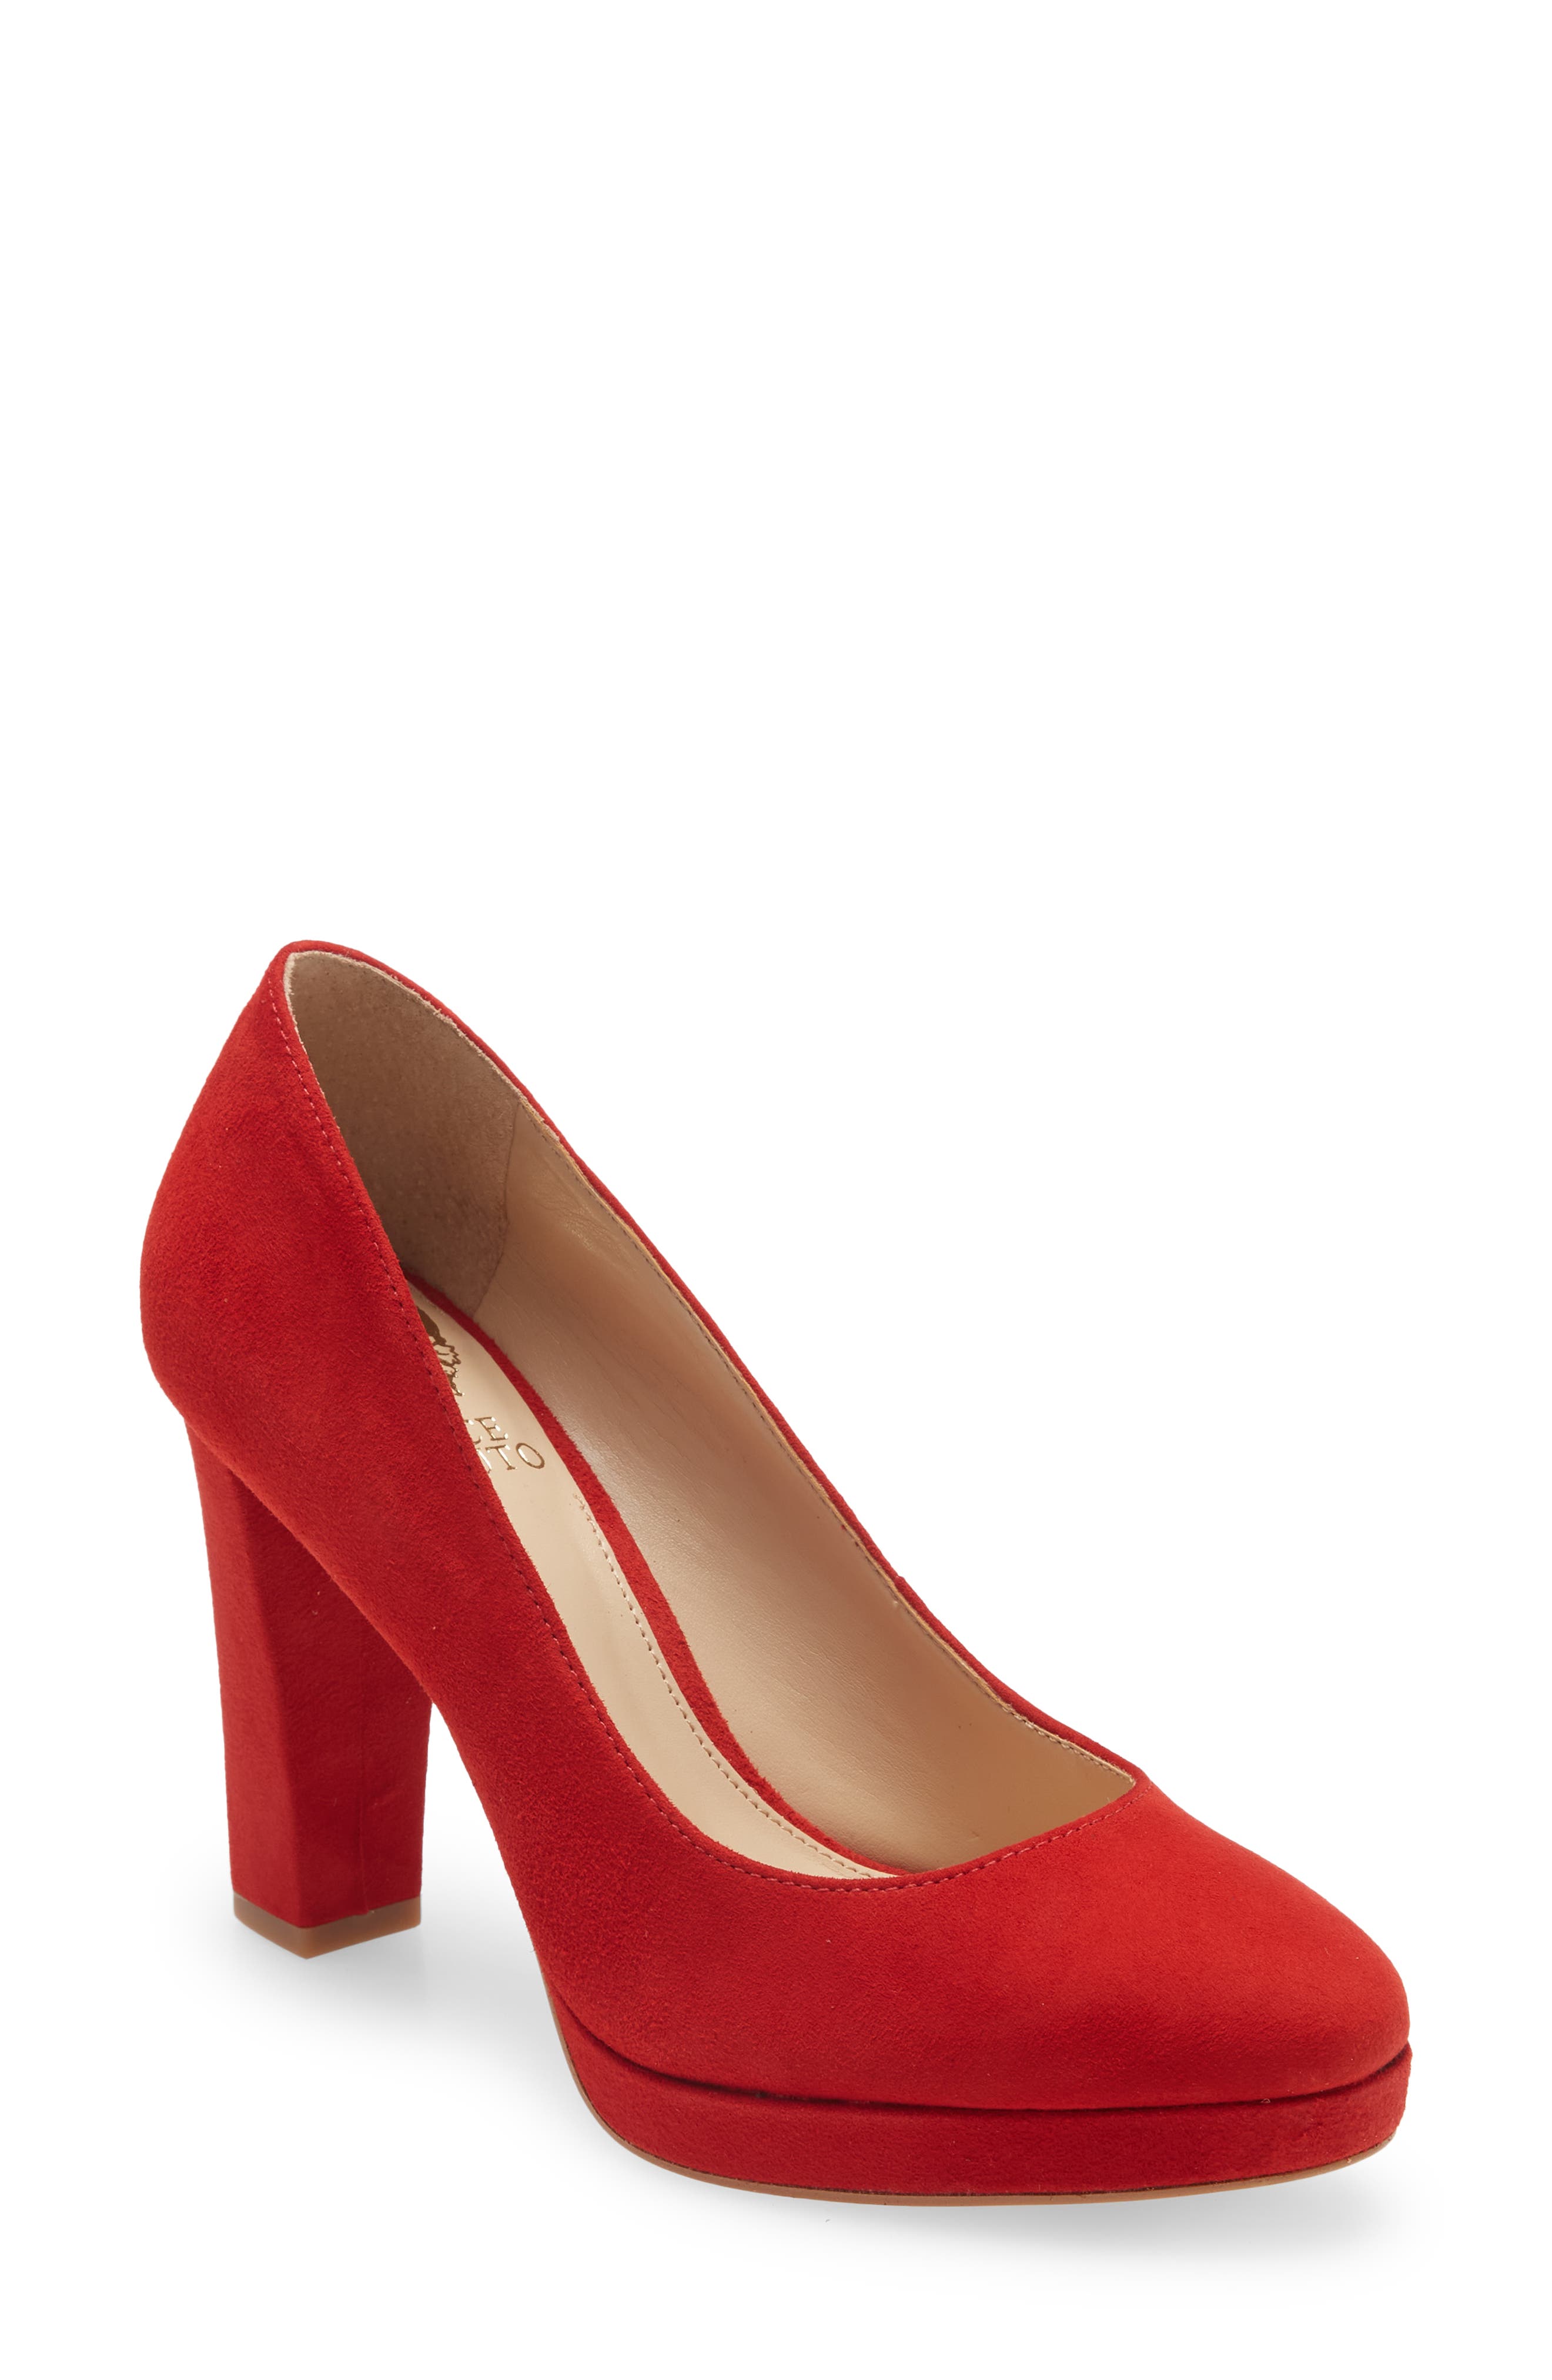 UPC 191707345836 product image for Vince Camuto Halria Pump in Cherry Berry True Suede at Nordstrom, Size 9.5 | upcitemdb.com